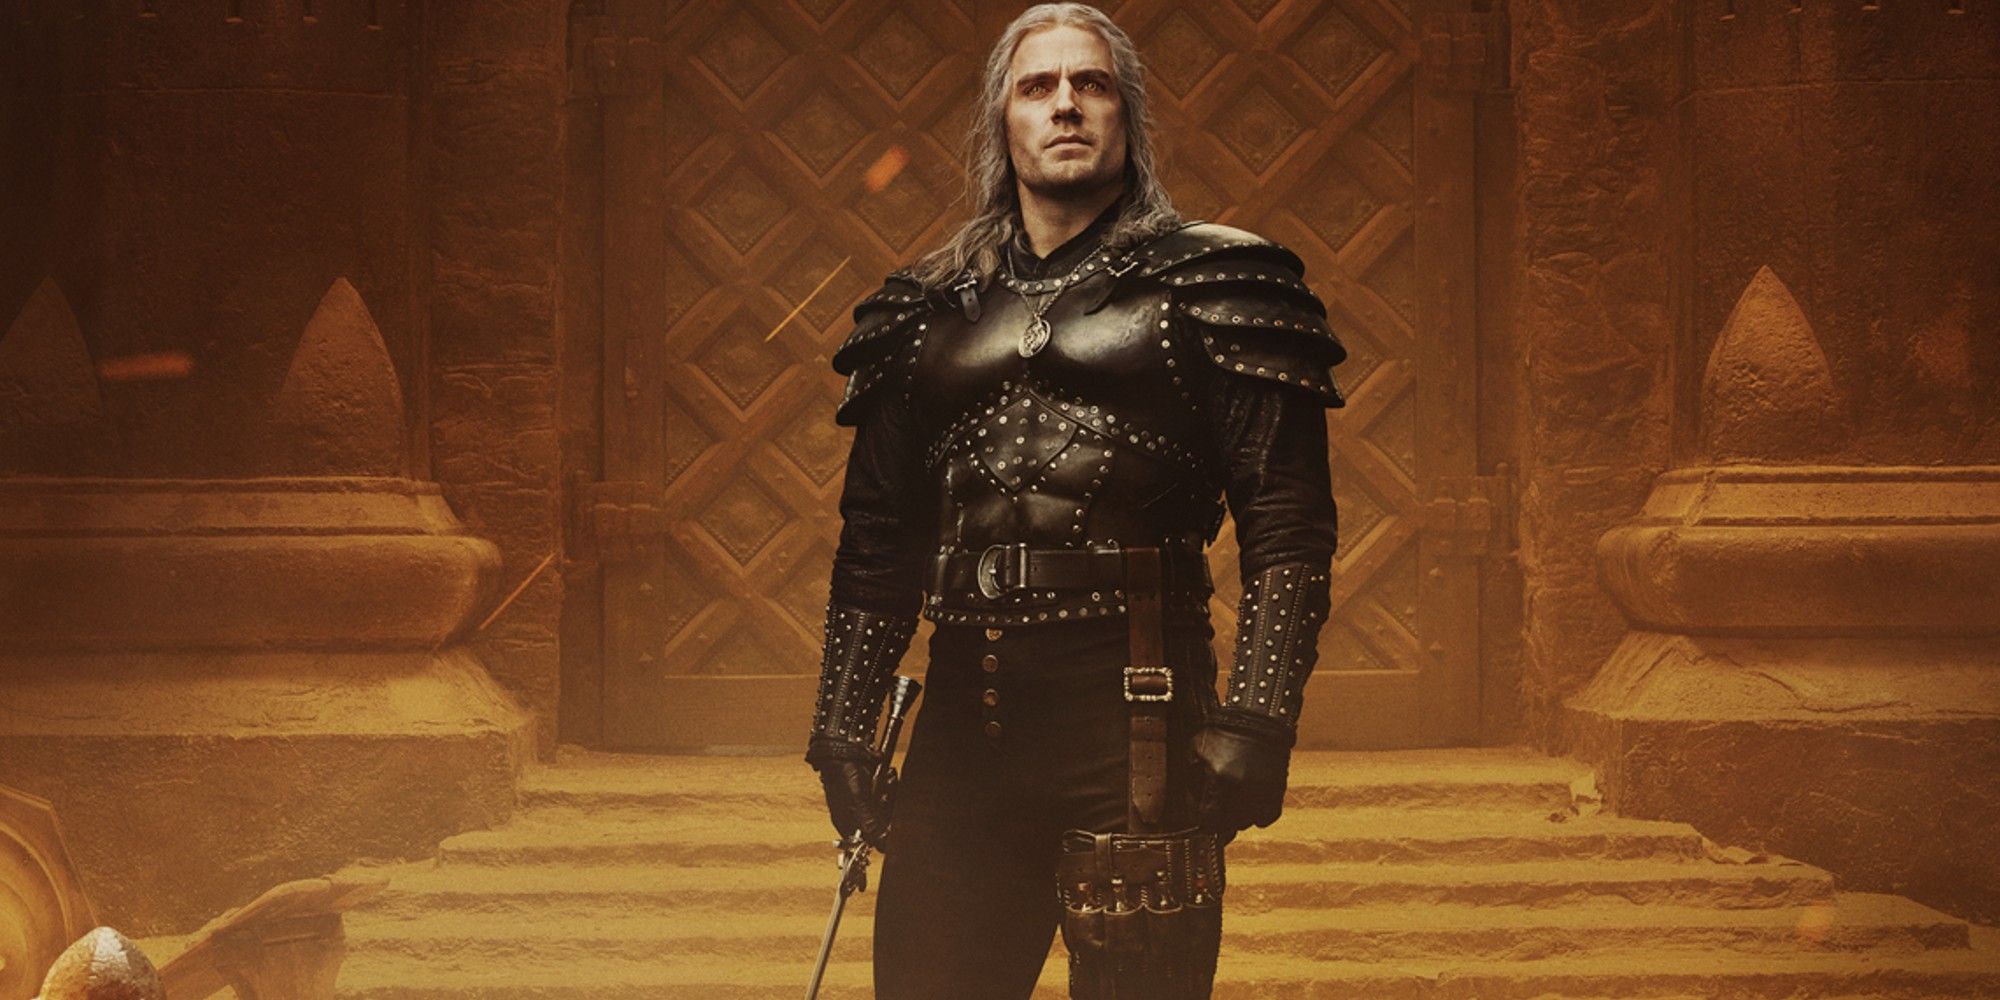 Geralt standing still and looking ahead in The Witcher.